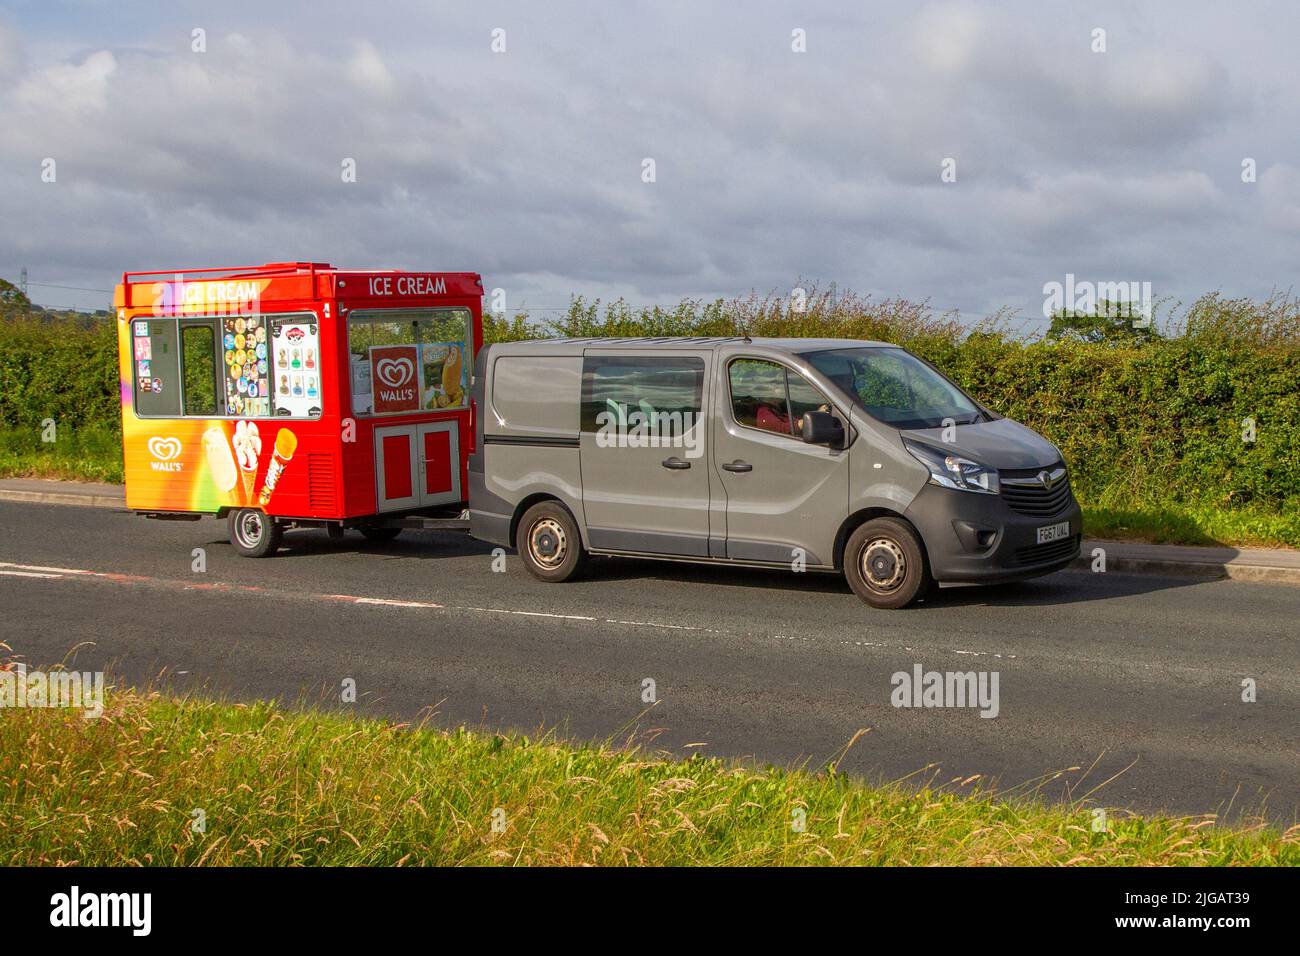 2017 grey Vauxhall Vivaro L1H1 2900 Sportive CDTi BITURBO S/S Van towing mobile ice-cream kiosk; en-route to Hoghton Tower for the Supercar Summer Showtime car meet which is organised by Great British Motor Shows in Preston, UK Stock Photo